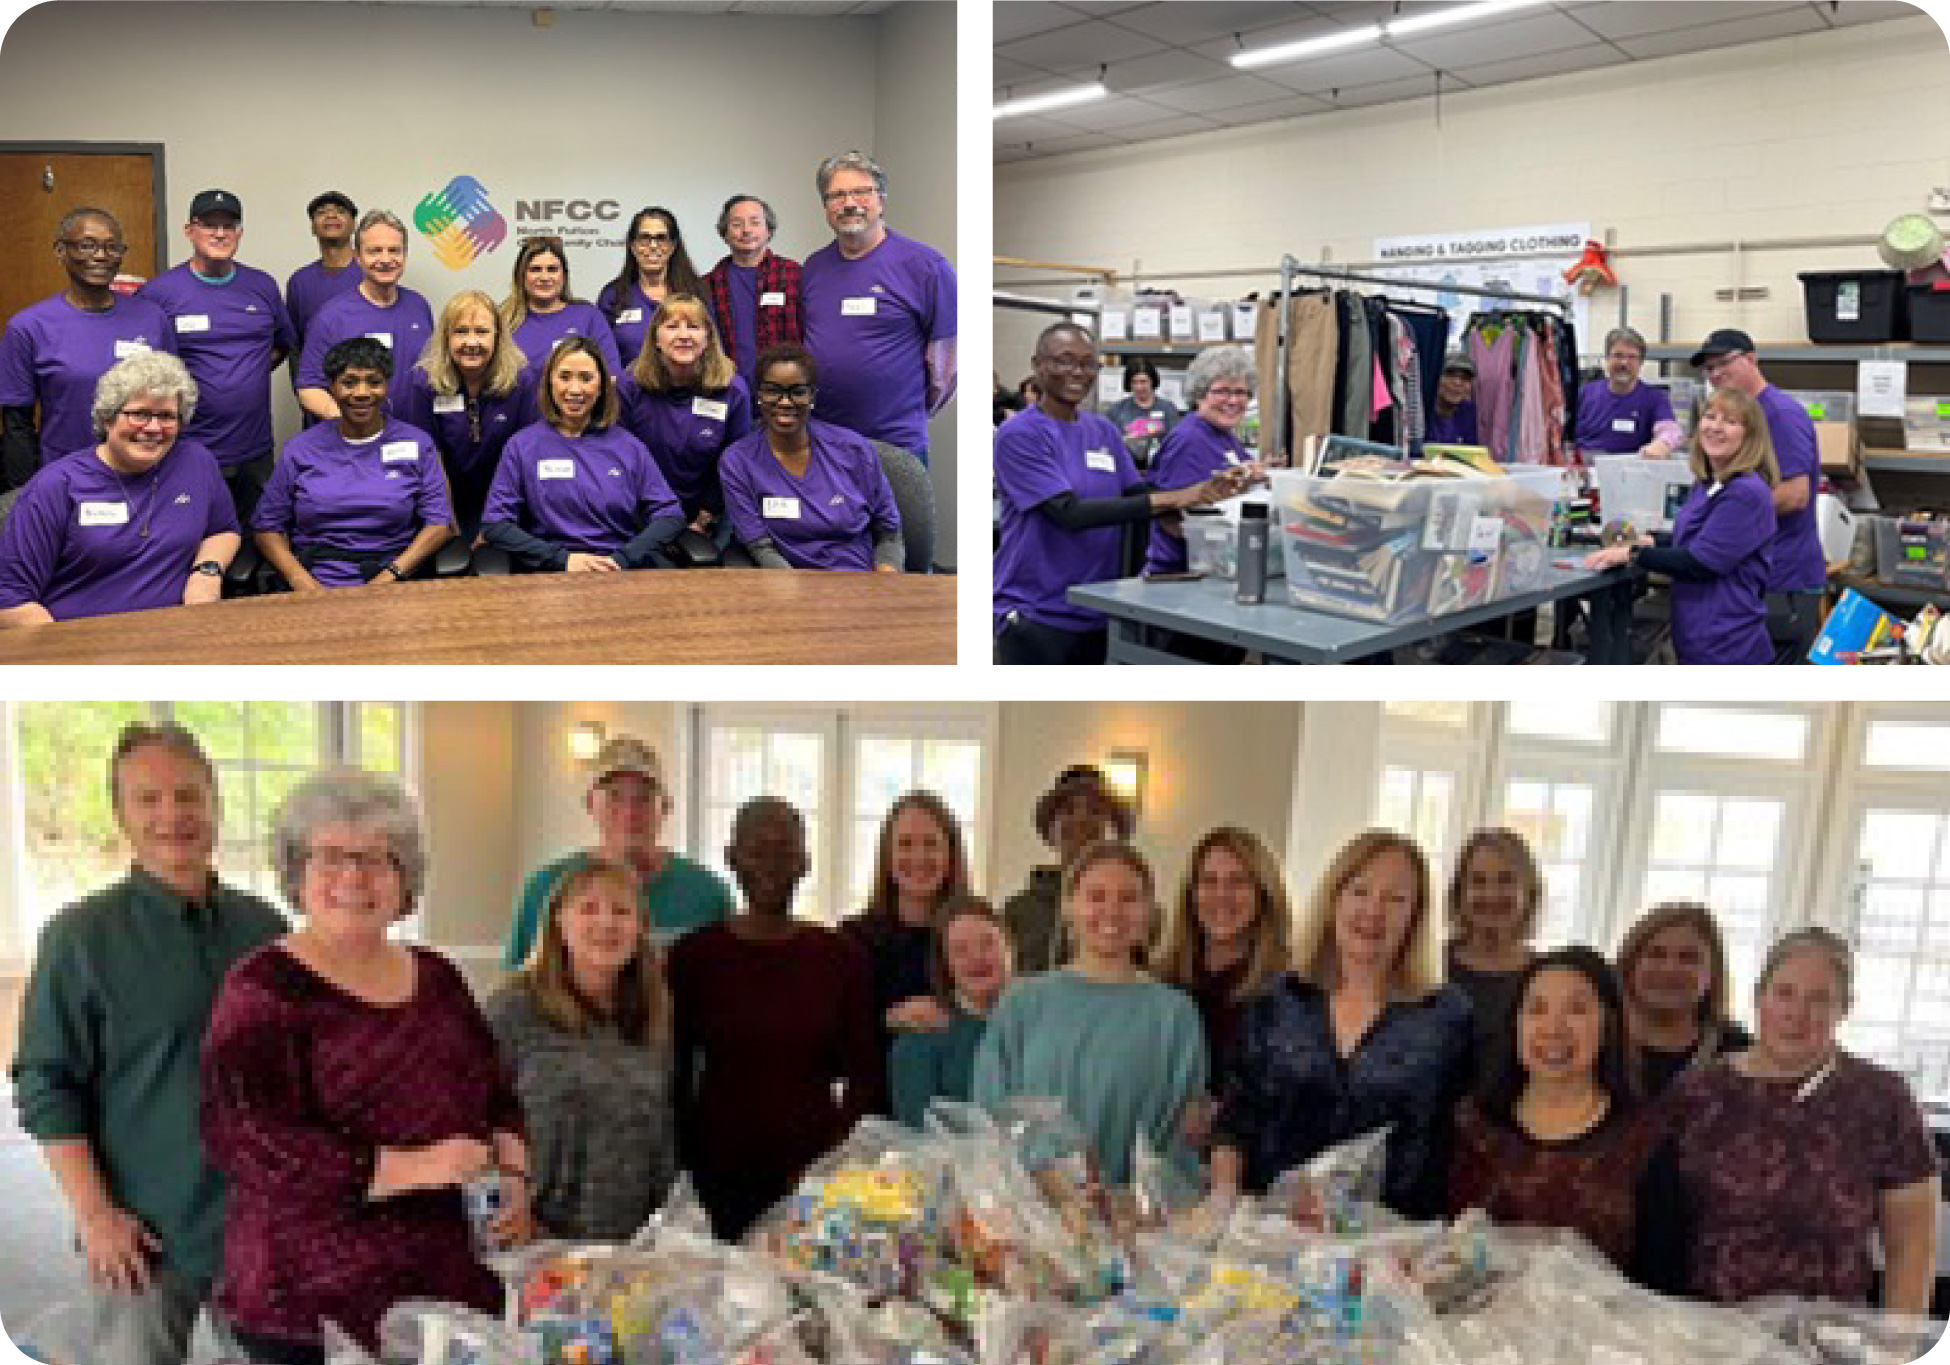 Altera Ventus employees assemble Hope hygiene, snack, and super pack food bags for Hope Atlanta